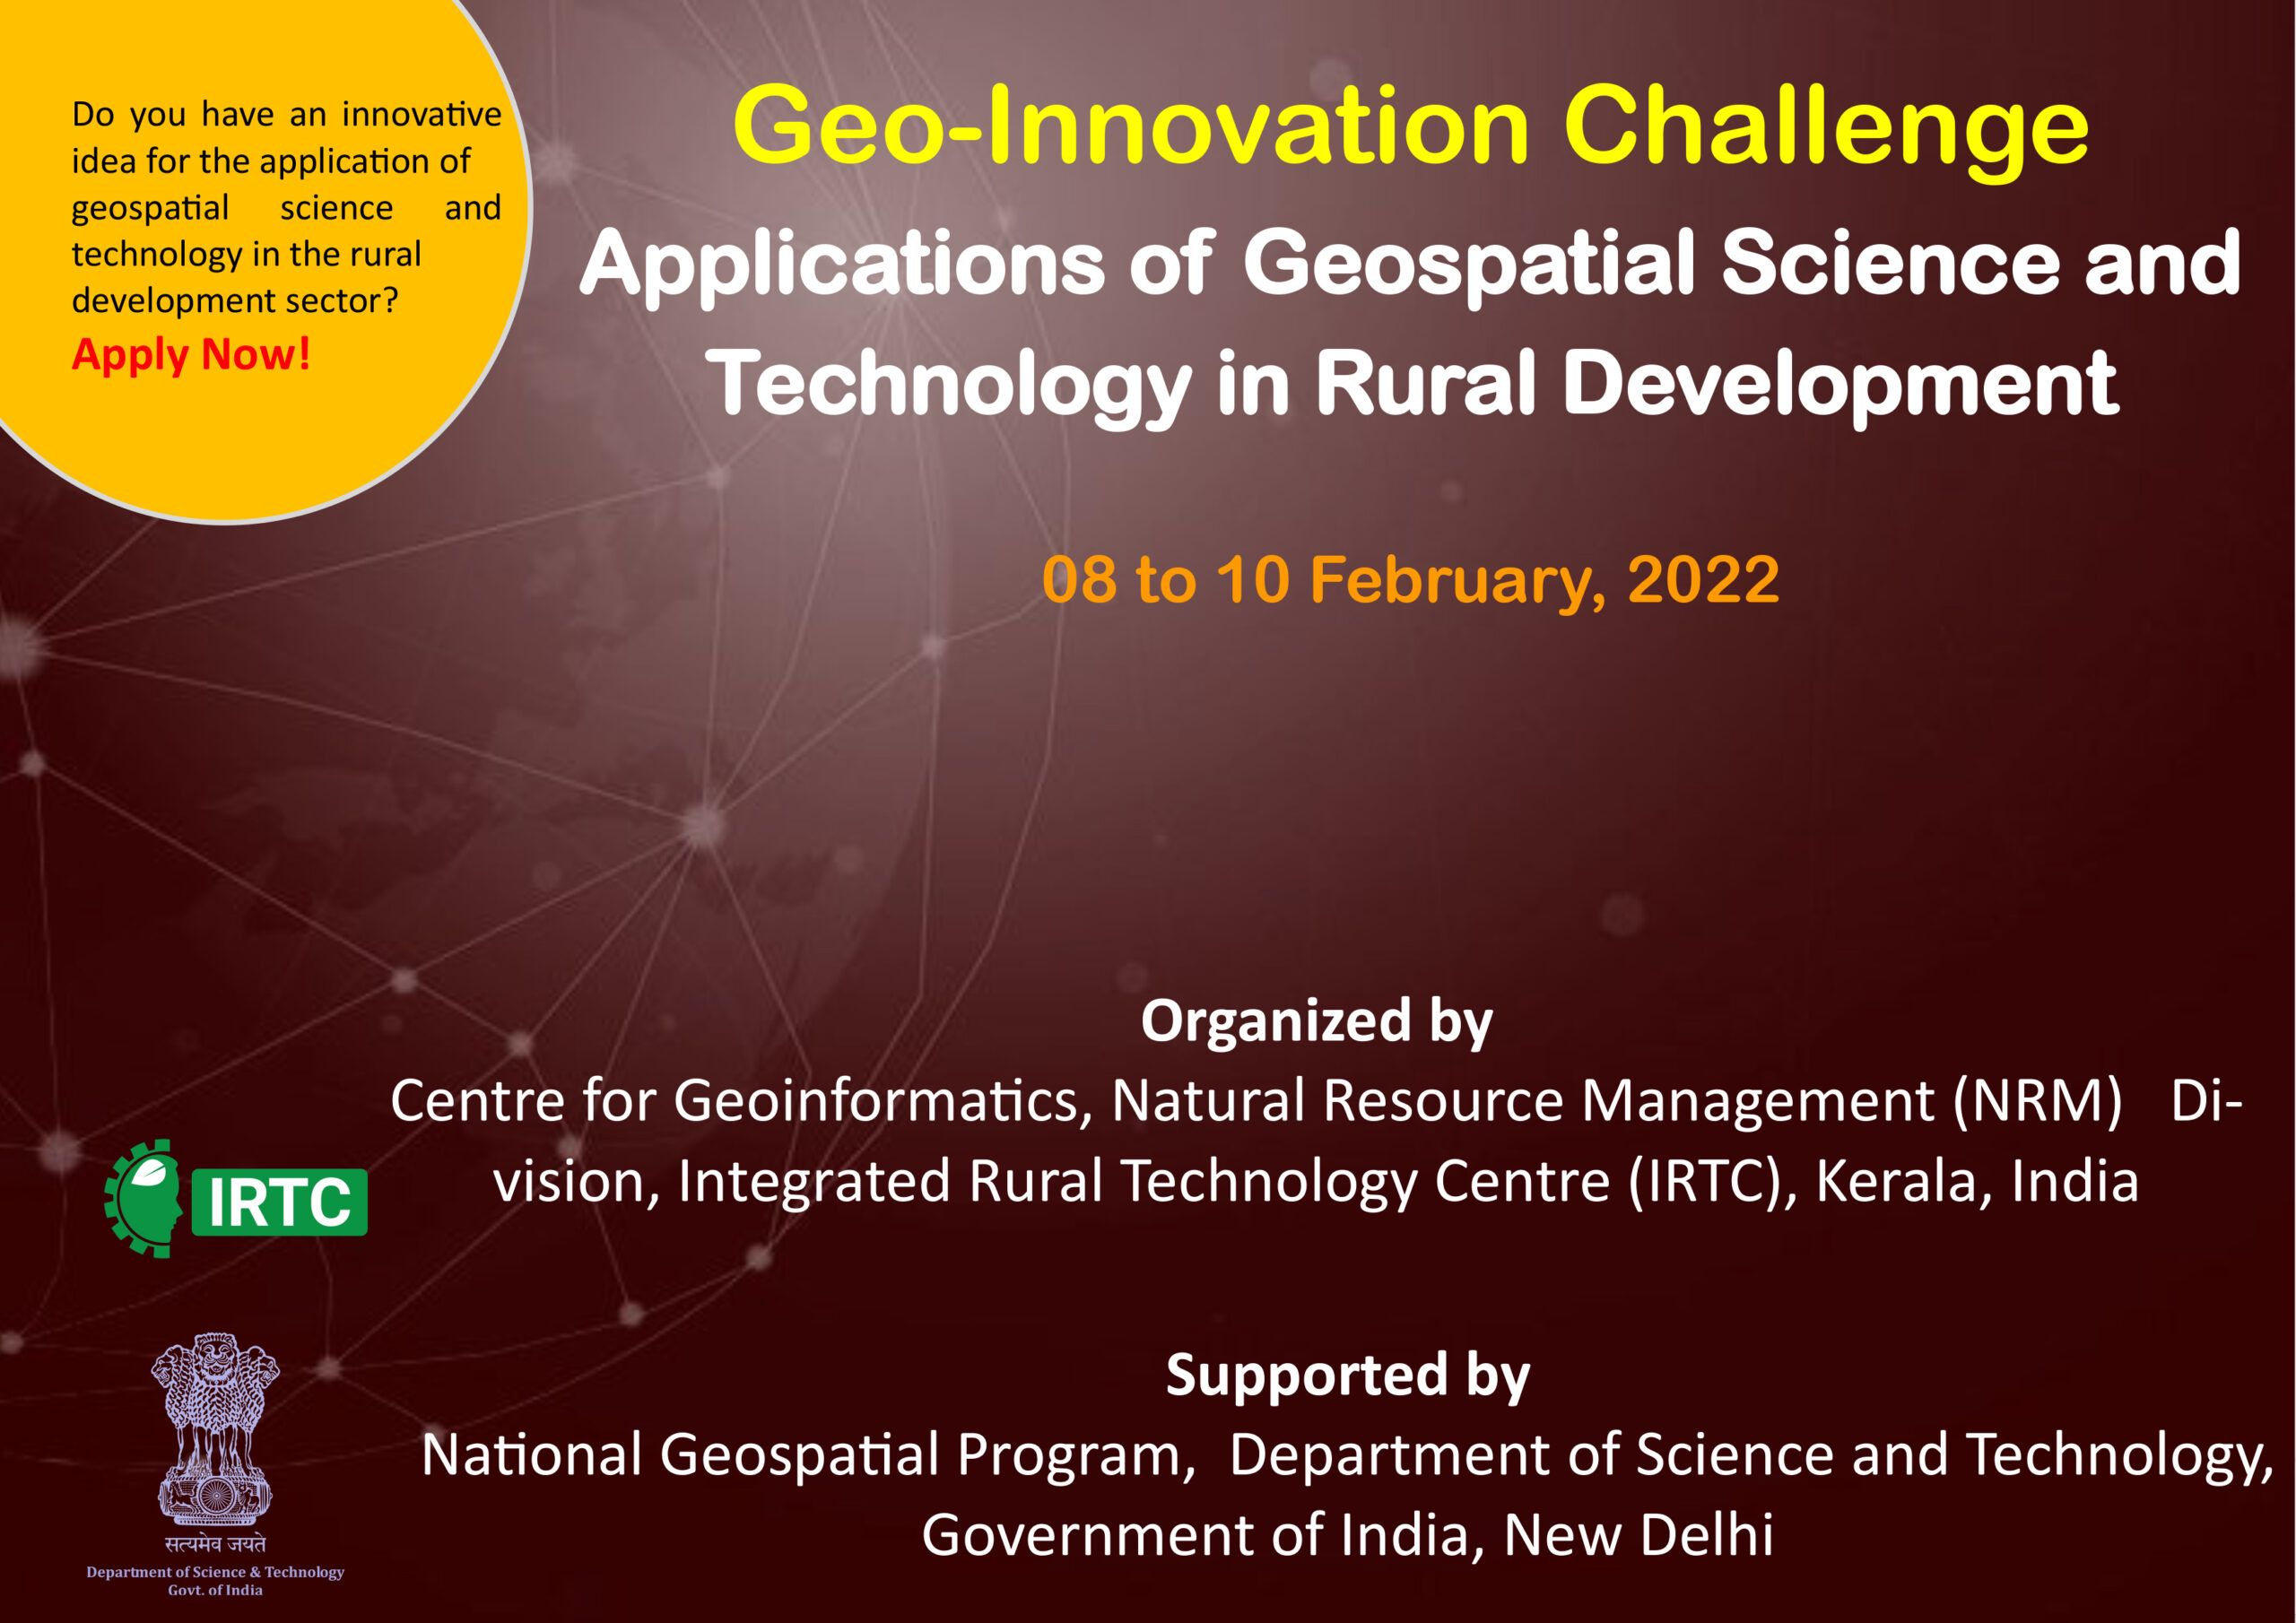 Geo-innovation Challenge: Applications of Geospatial Science and Technology in Rural Development, 23-25 March, 2022